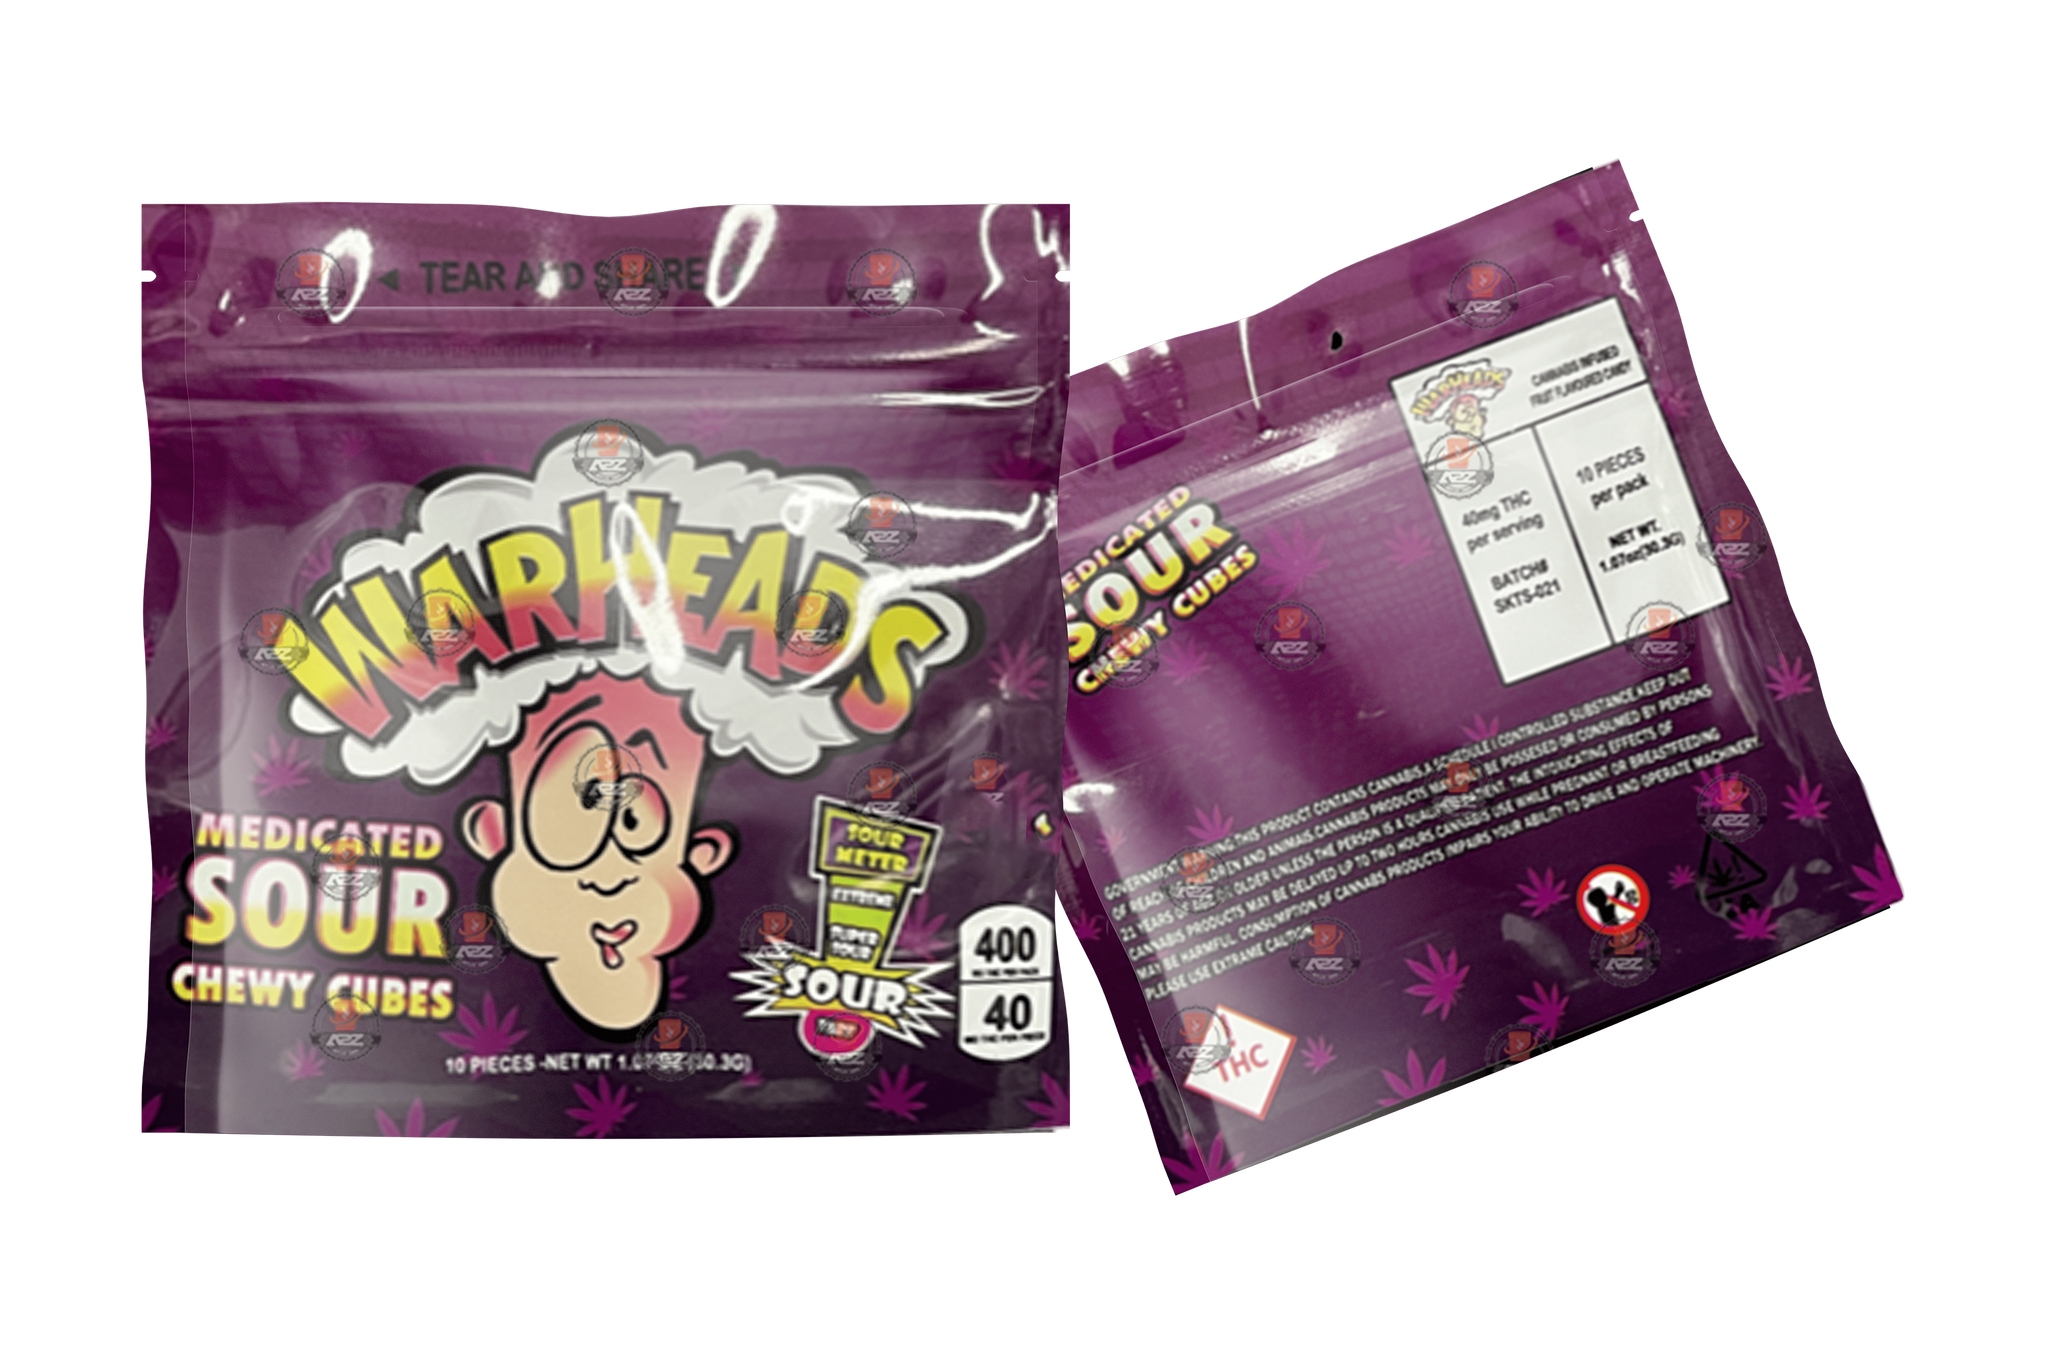 WarHeads Sour 400mg Mylar bags Chewy cubes- packaging only